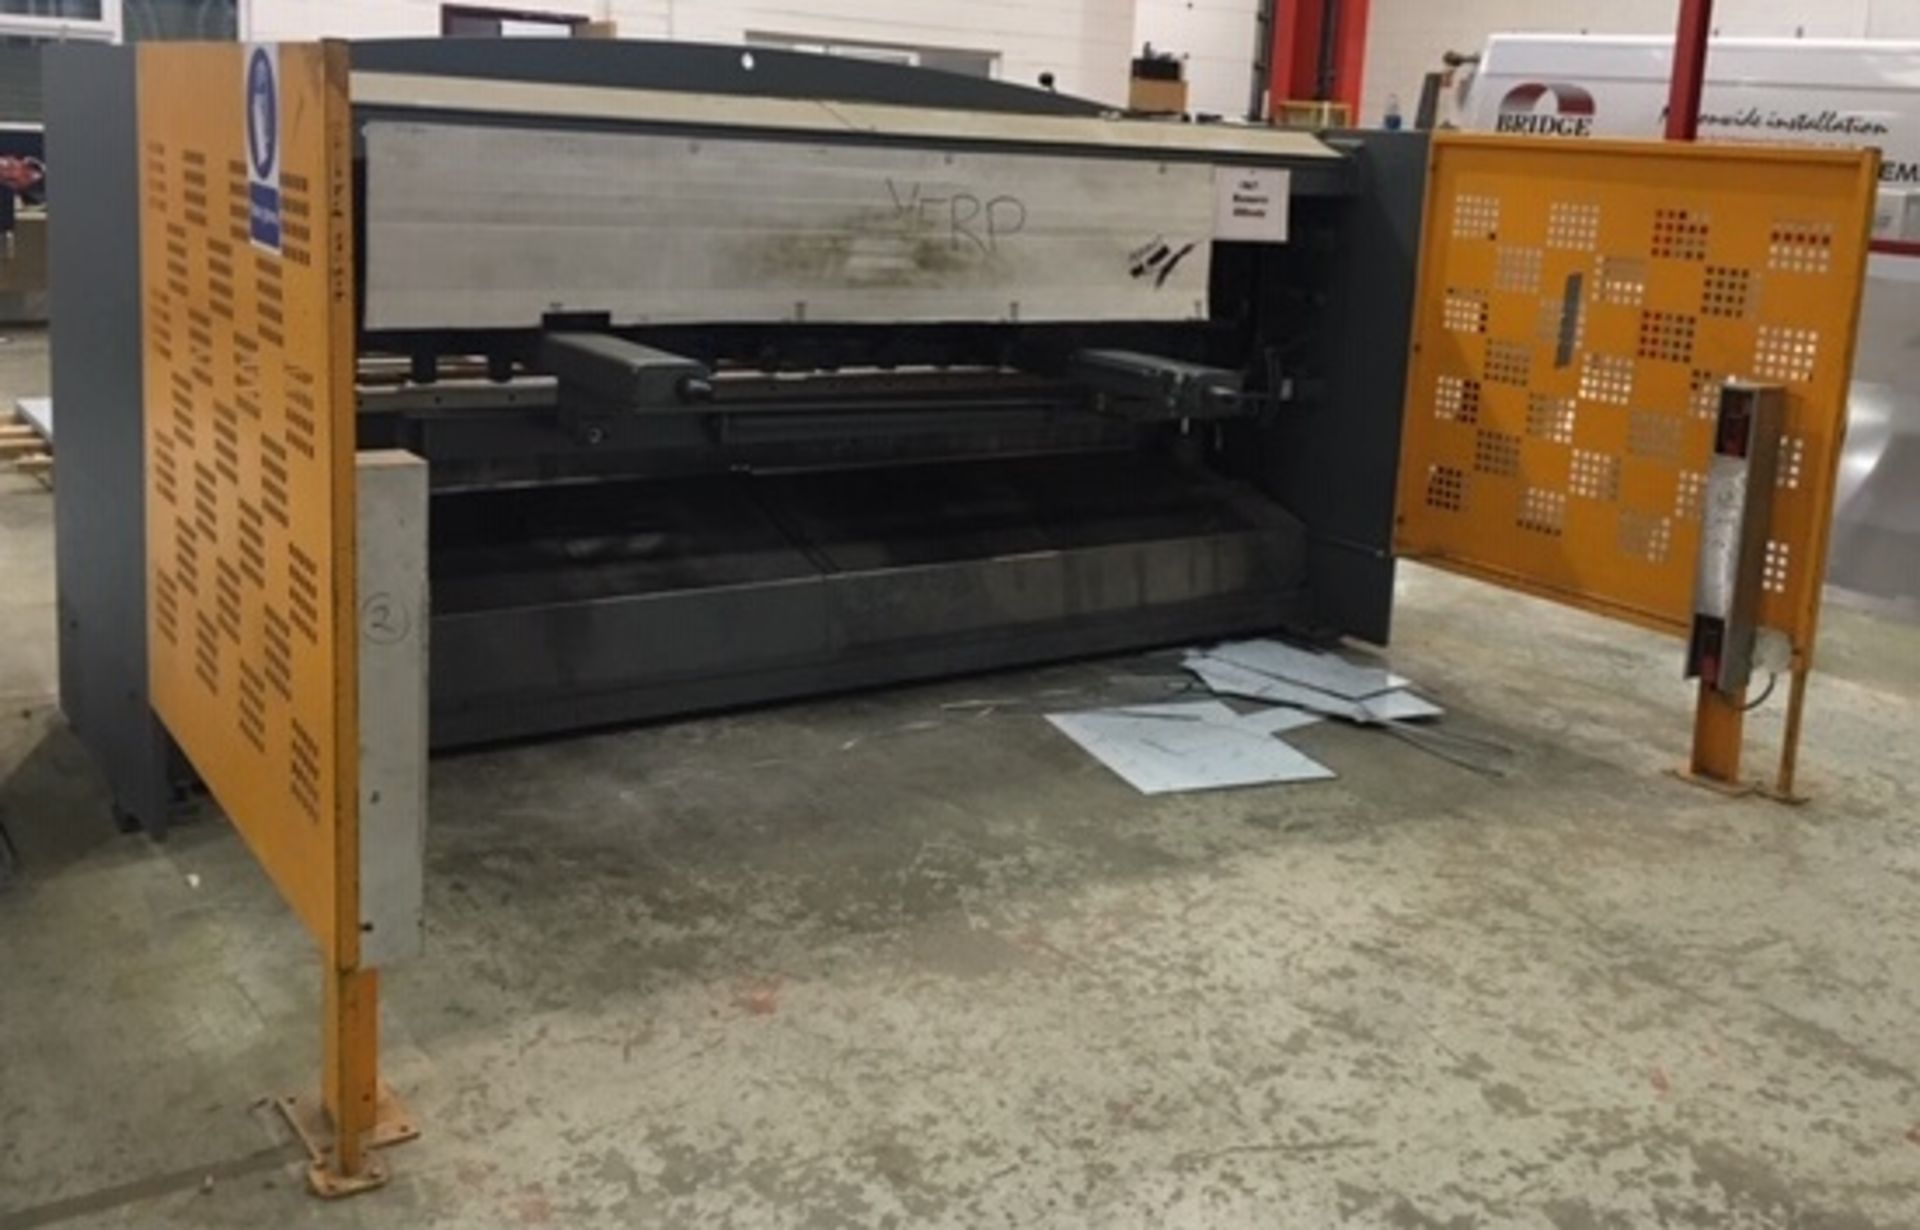 Kingsland 3000/6 Guillotine w/ SP8 Control Panel - Image 3 of 8